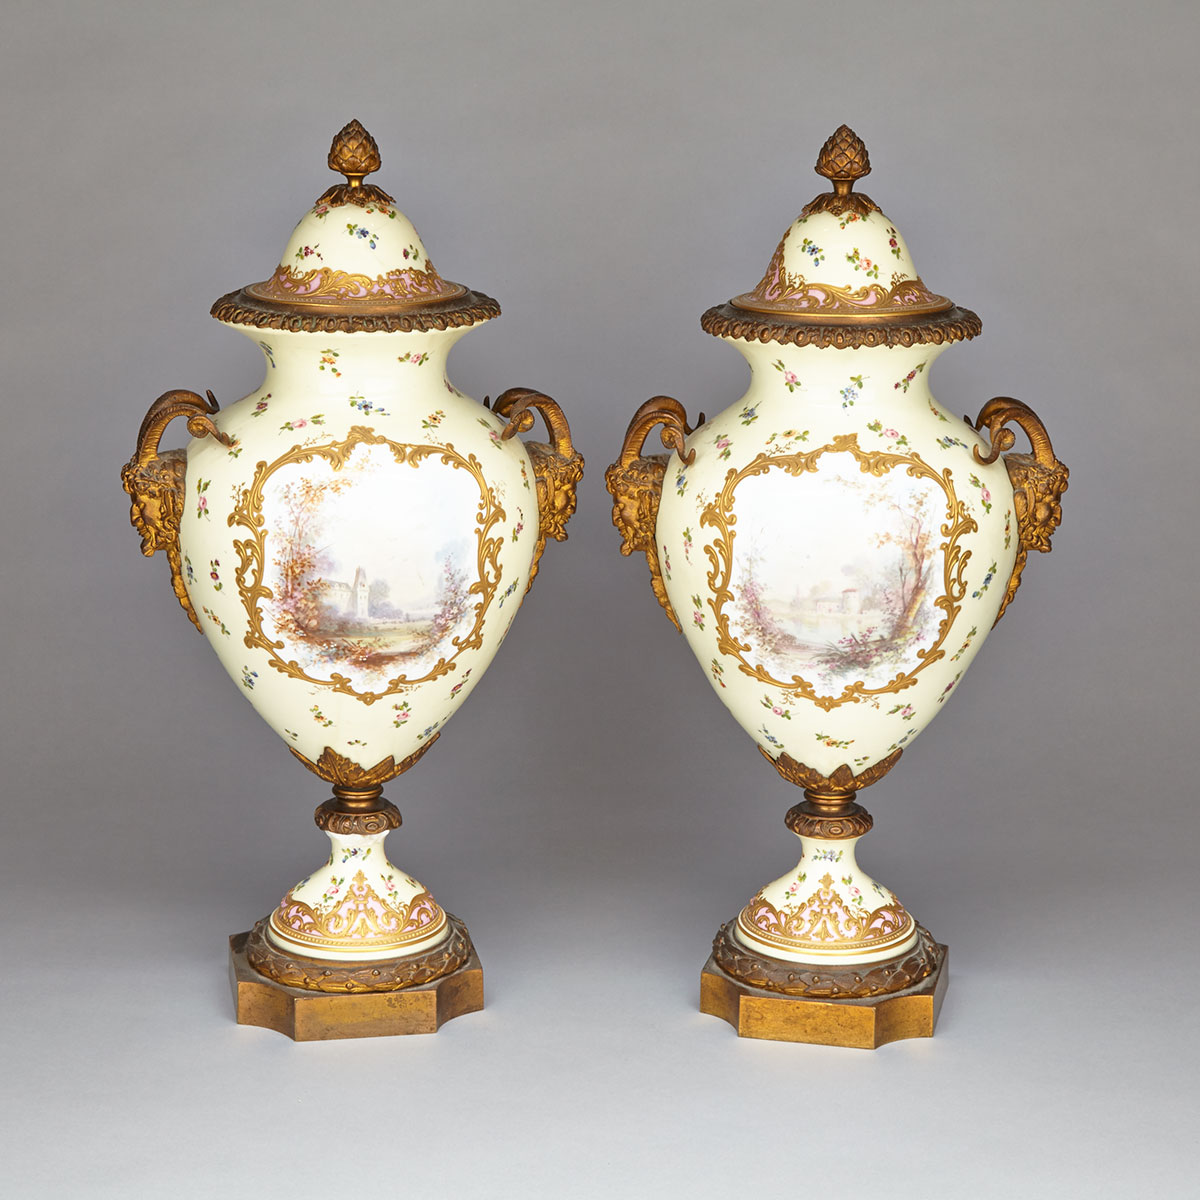 Pair of Ormolu Mounted ‘Sèvres’ Vases and Covers, H. Poitevin, c.1900